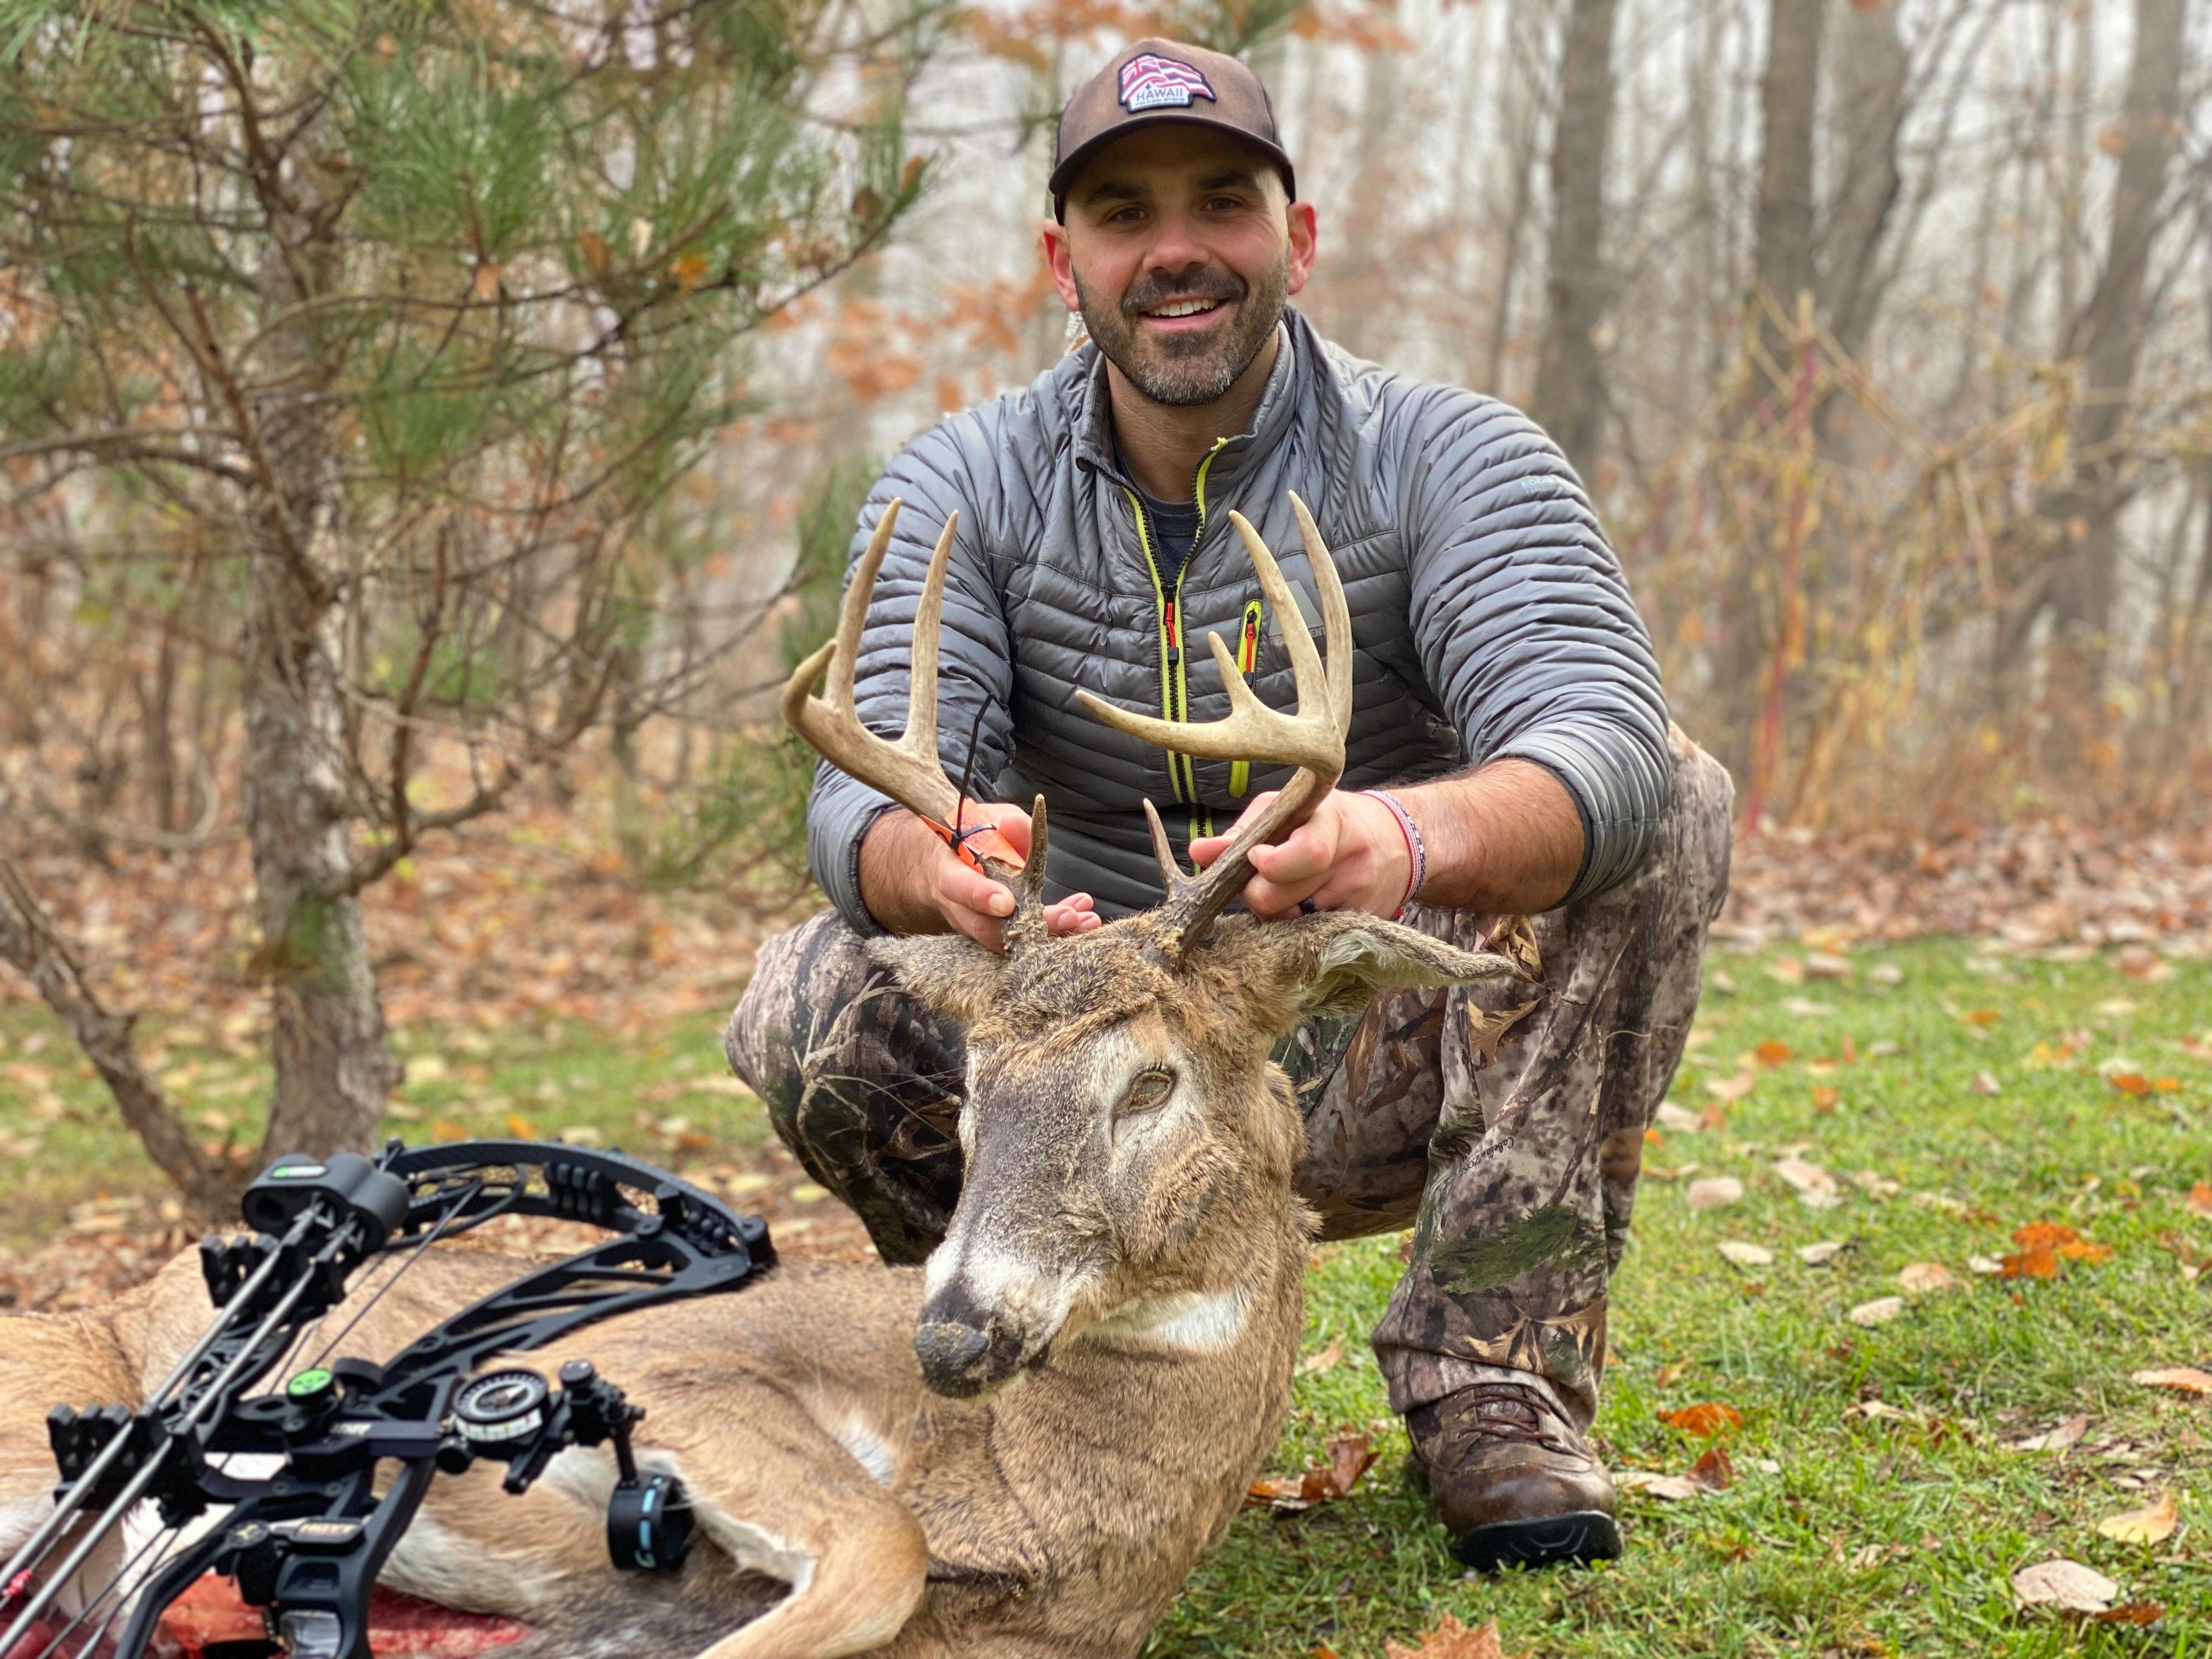 Steve Karapetian says he's just glad he found his deer and has a cool story to tell. Image provided by Steve Karapetian